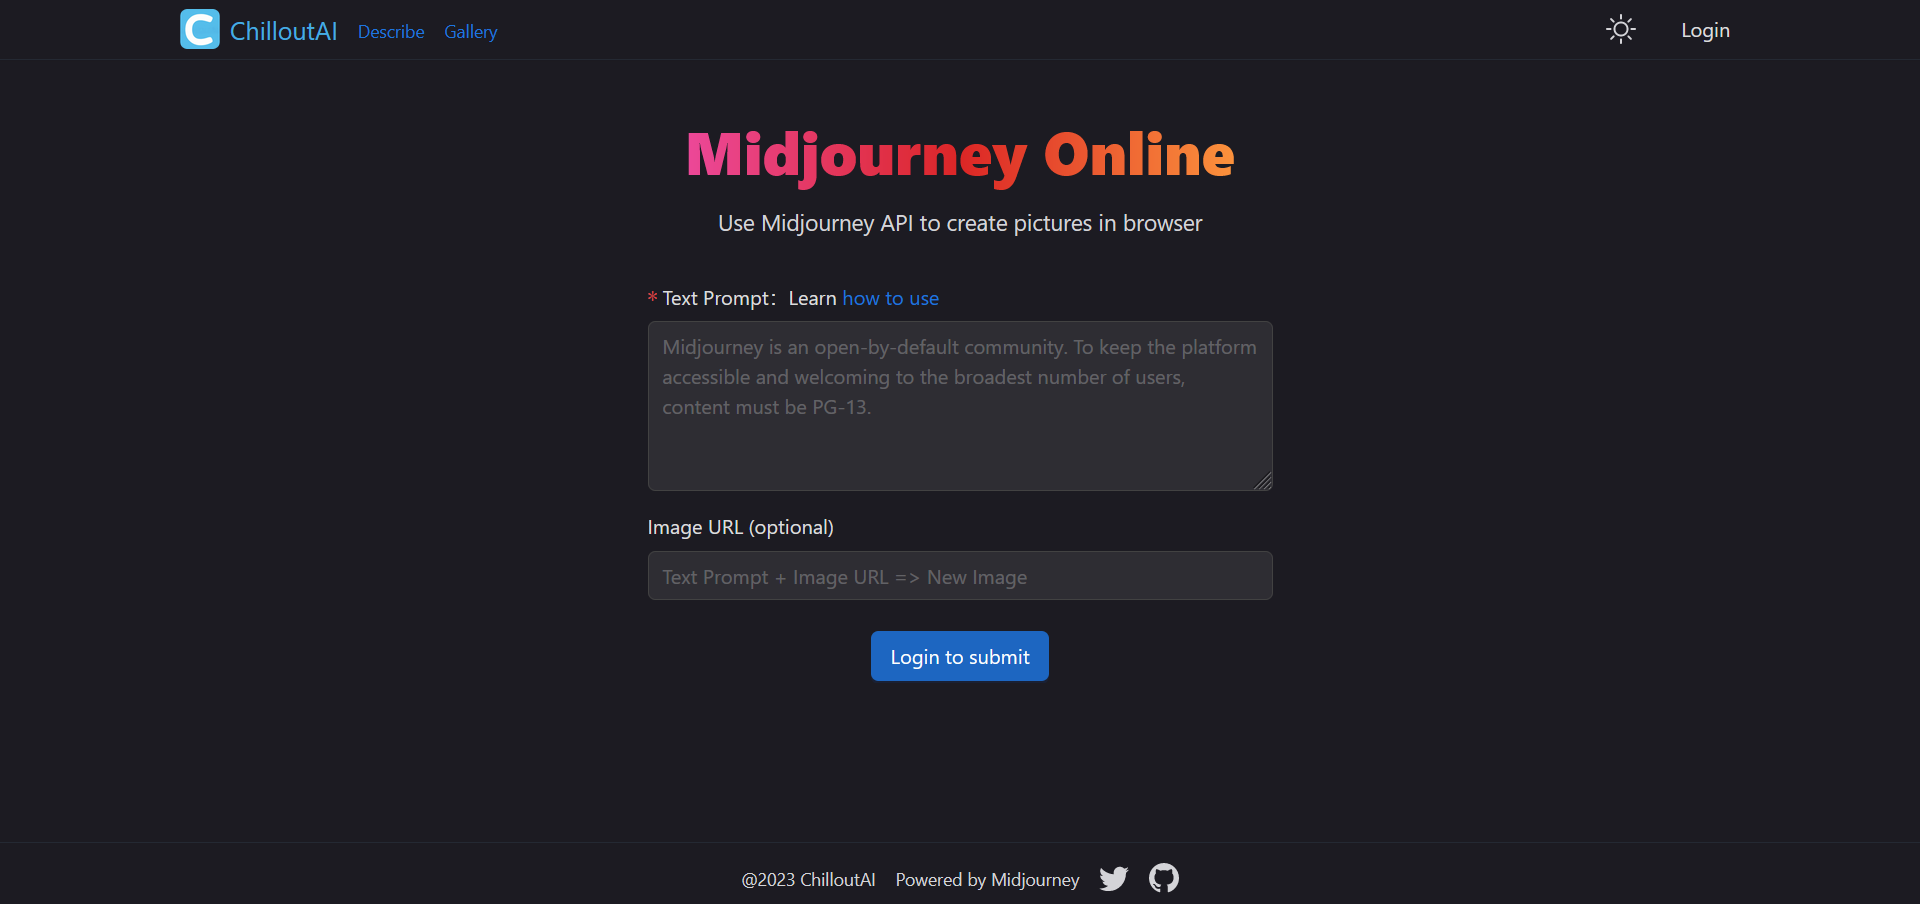  Use Midjourney API to create pictures in browser